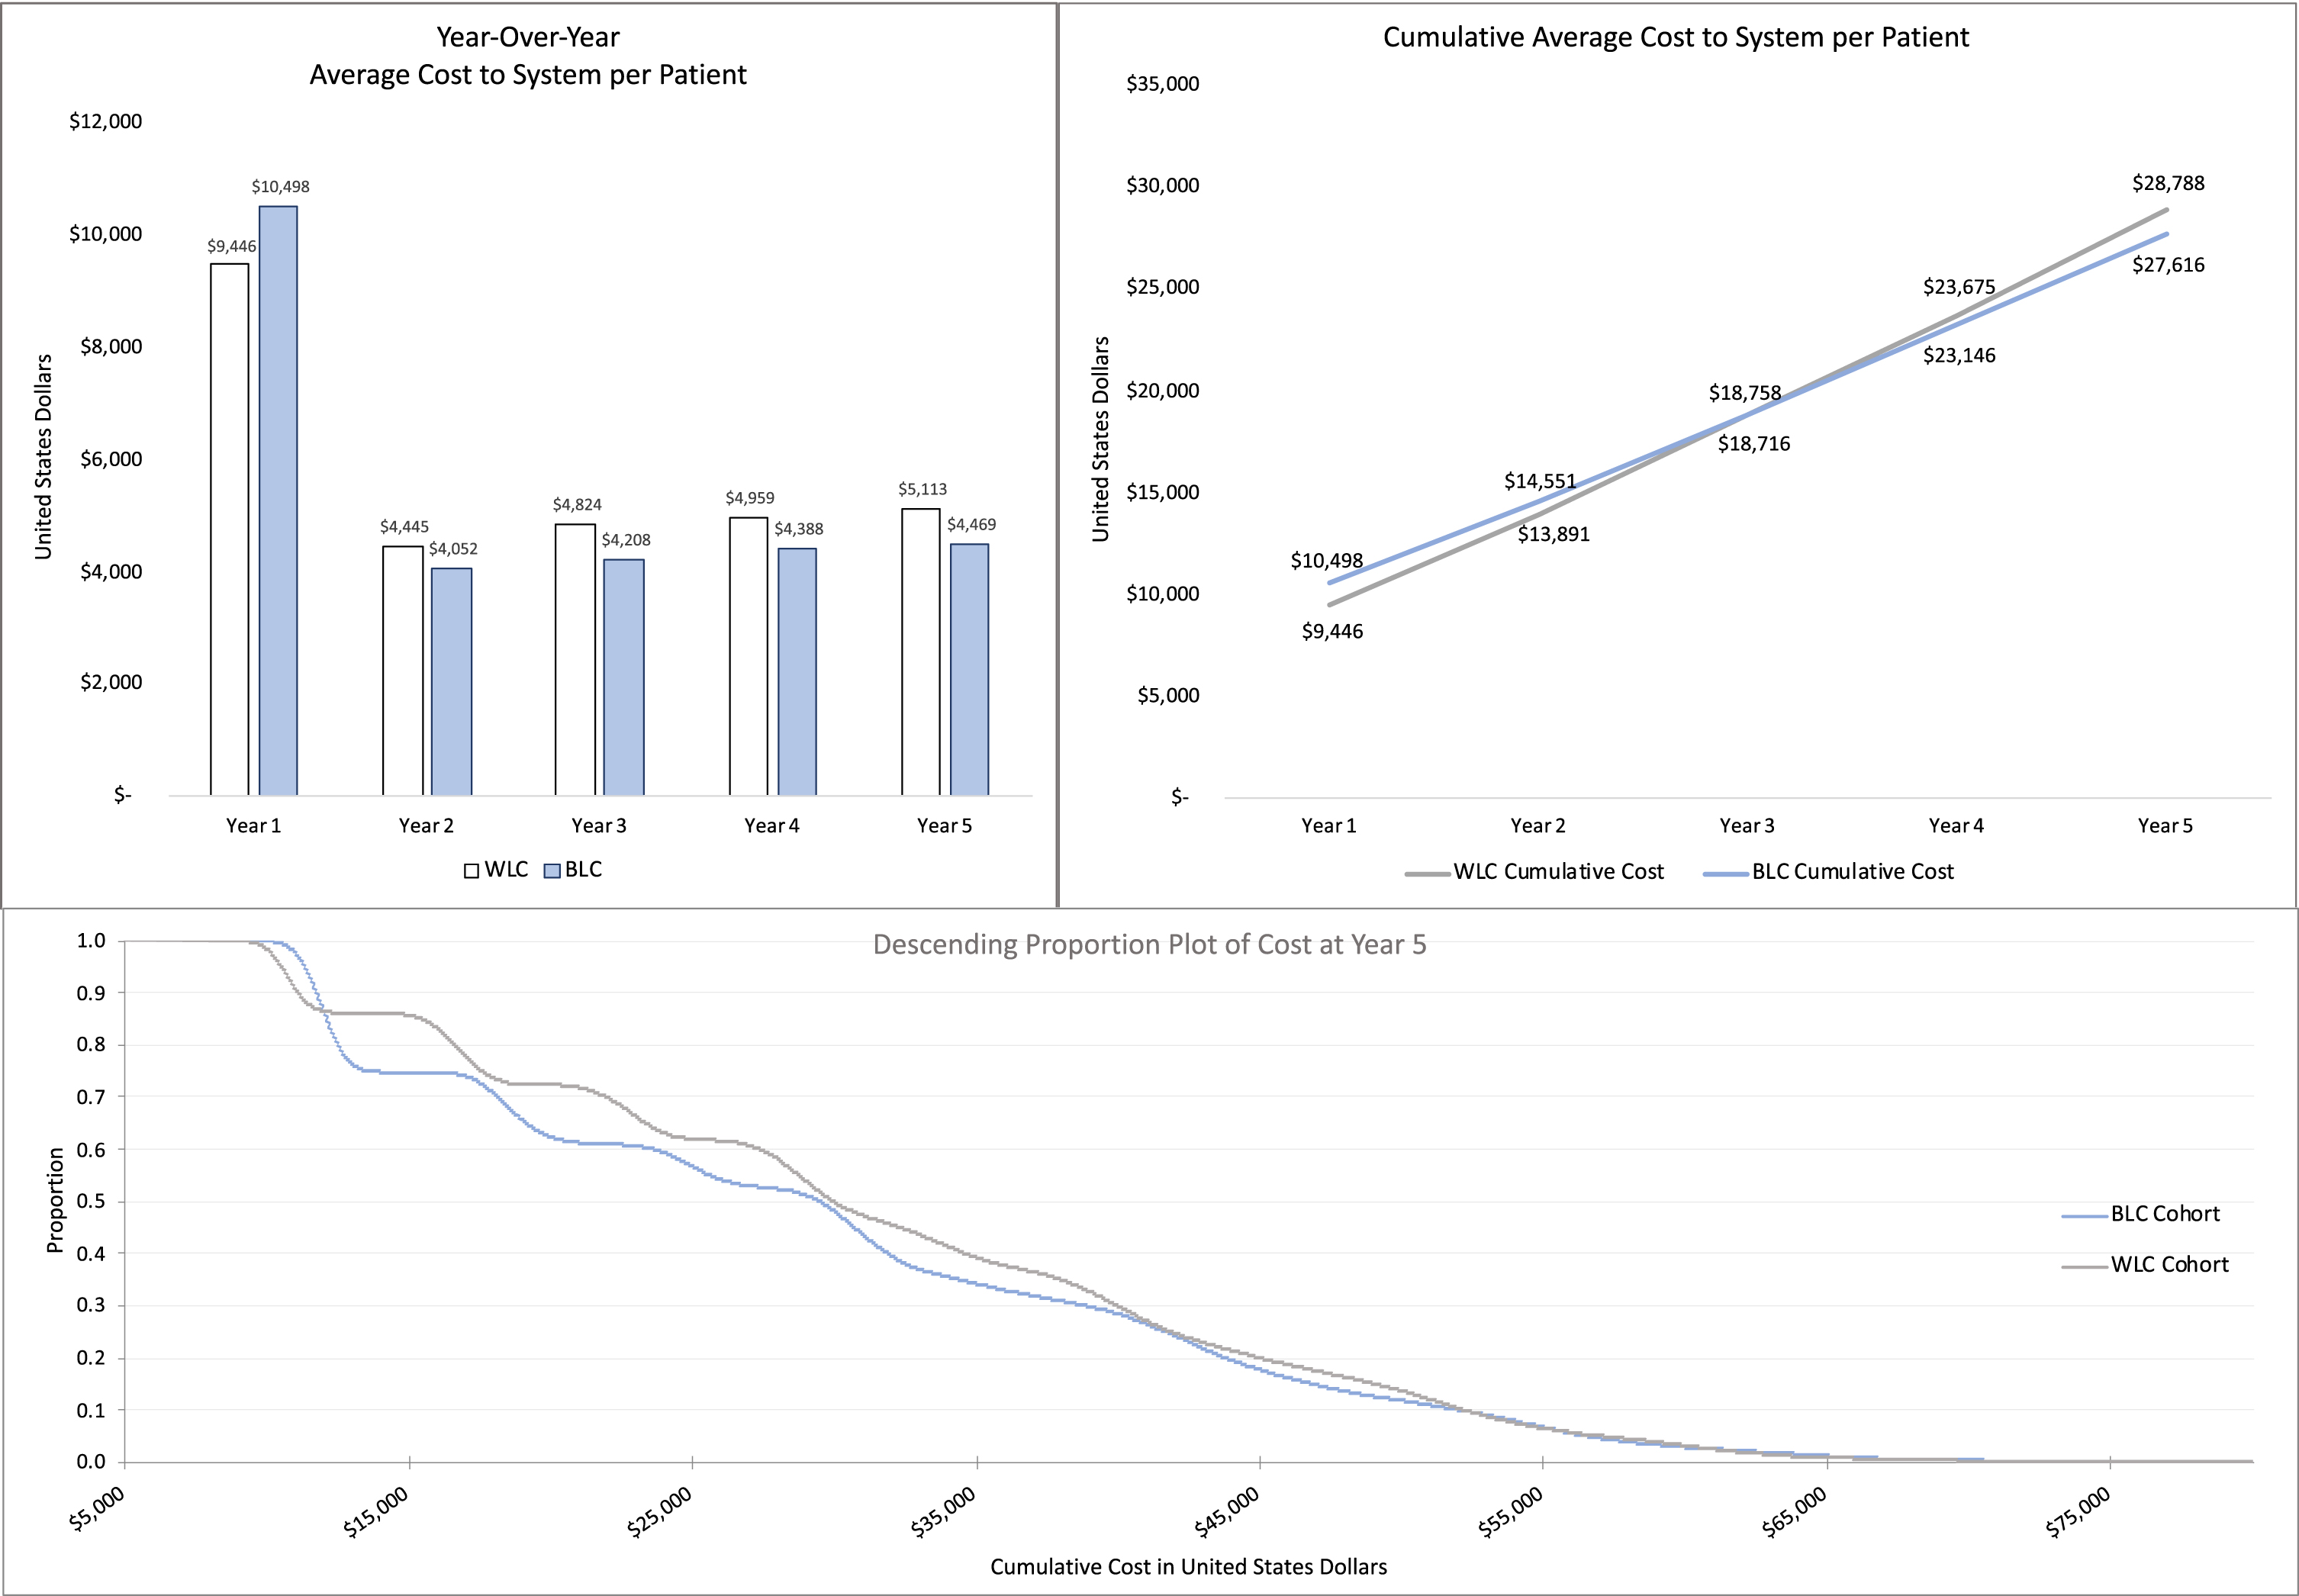 Economic Outcomes. A. Year-over-year average cost per patient of blue-light and white-light guided transurethral resection of bladder tumor. B. Cumulative average cost per patient by year. C. Descending proportion plot of cumulative costs at year 5 for blue-light and white-light cystoscopy cohorts. Blue graphics represent the blue-light cystoscopy cohort and light grey graphics represent the white-light cystoscopy cohort. All values in United States Dollars discounted to present value at 3% annual percentage rate. Blue values represent BLC, grey values represent WLC.